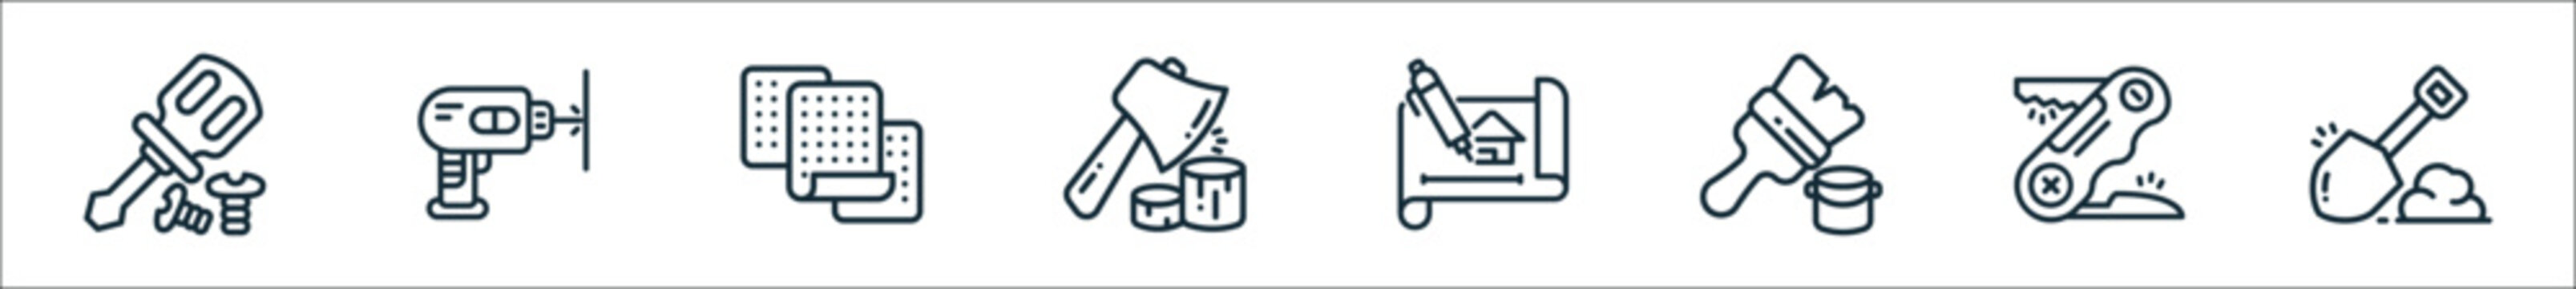 outline set of toolbox line icons. linear vector icons such as screwdriver, drill, sandpaper, axe, blueprint, paint brush, pocket knife, spade